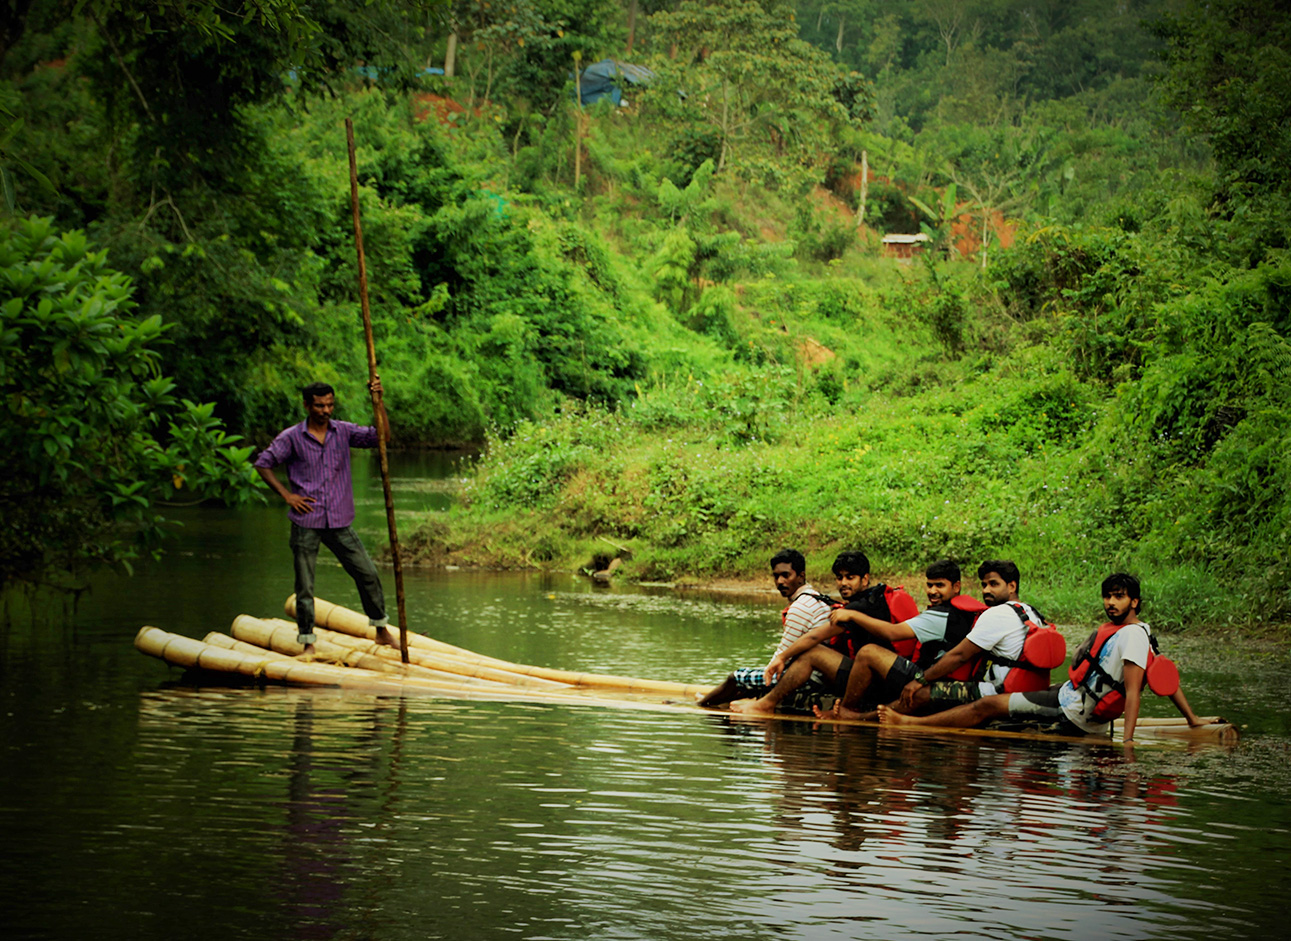 Bamboo Raft - Enjoy peaceful river rides on traditional bamboo rafts